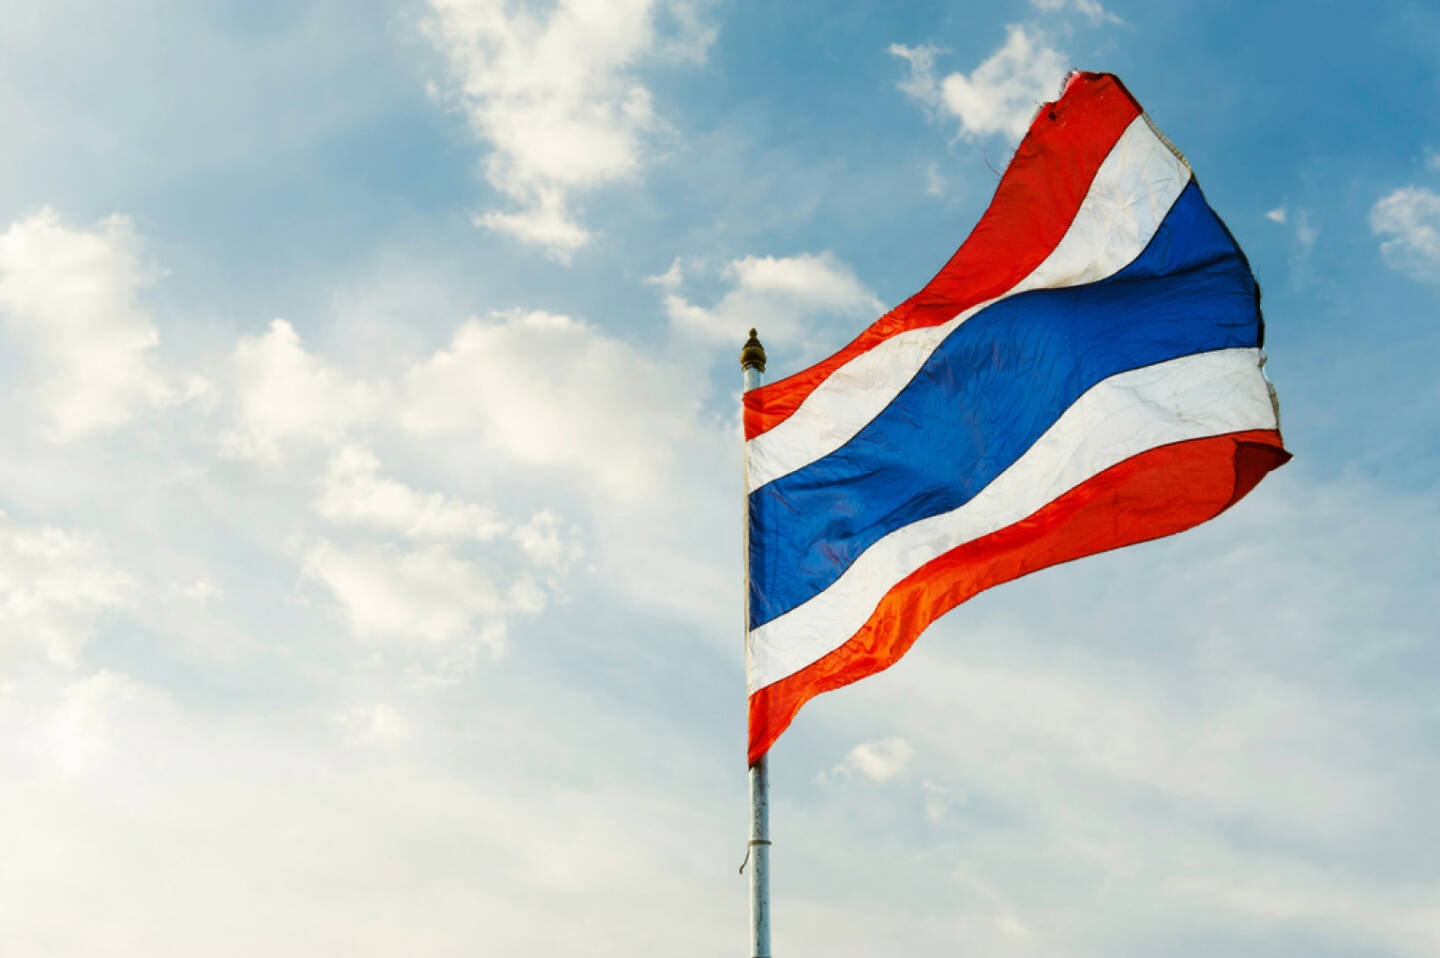 Thailand, Fahne, http://www.shutterstock.com/de/pic-191854448/stock-photo-image-of-waving-thai-flag-of-thailand-with-blue-sky-background.html 